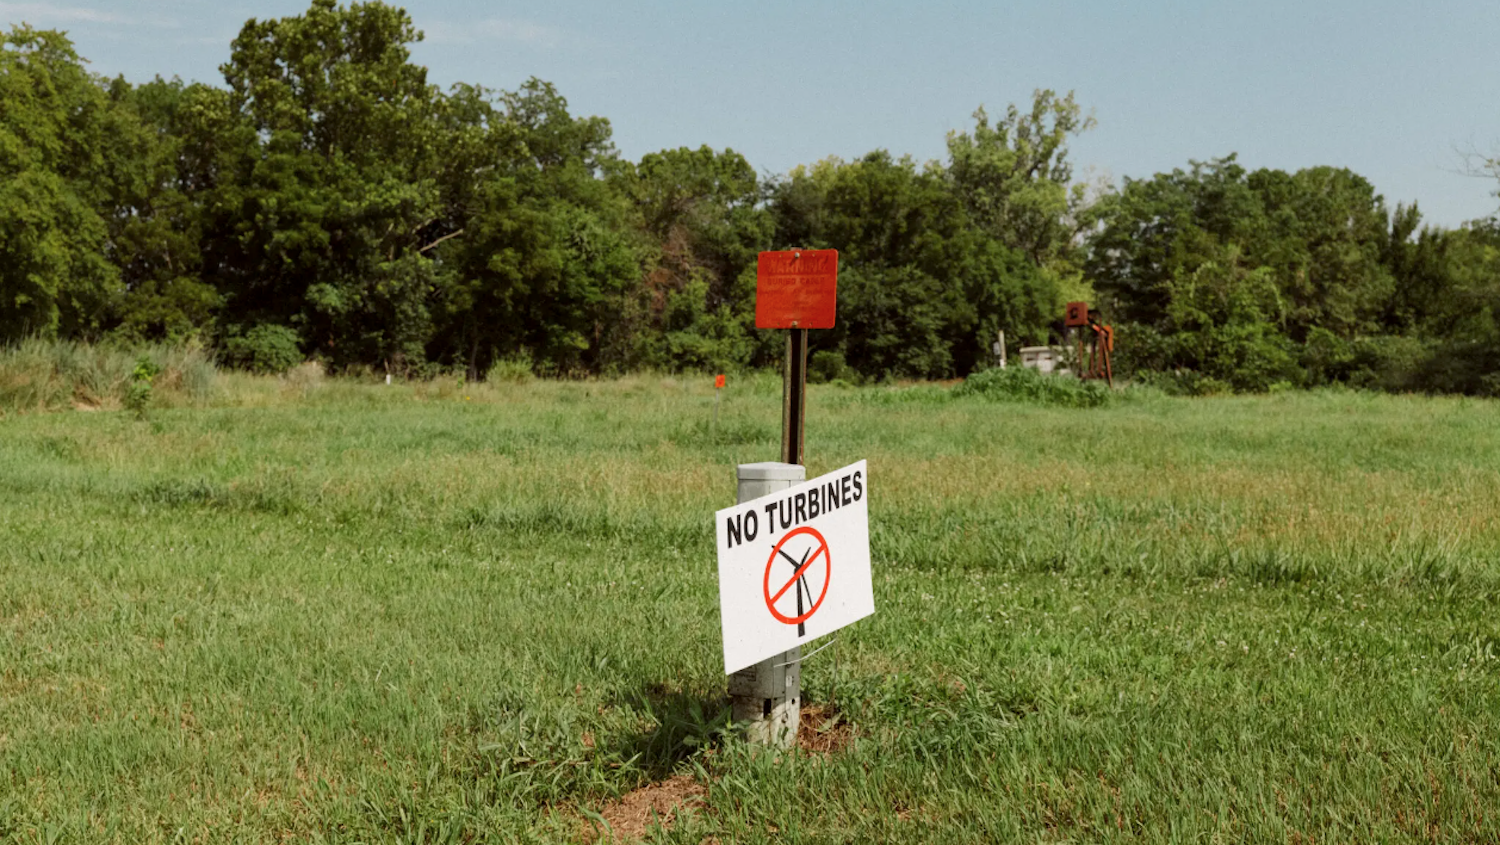 sign saying "No Turbines" in grassy field